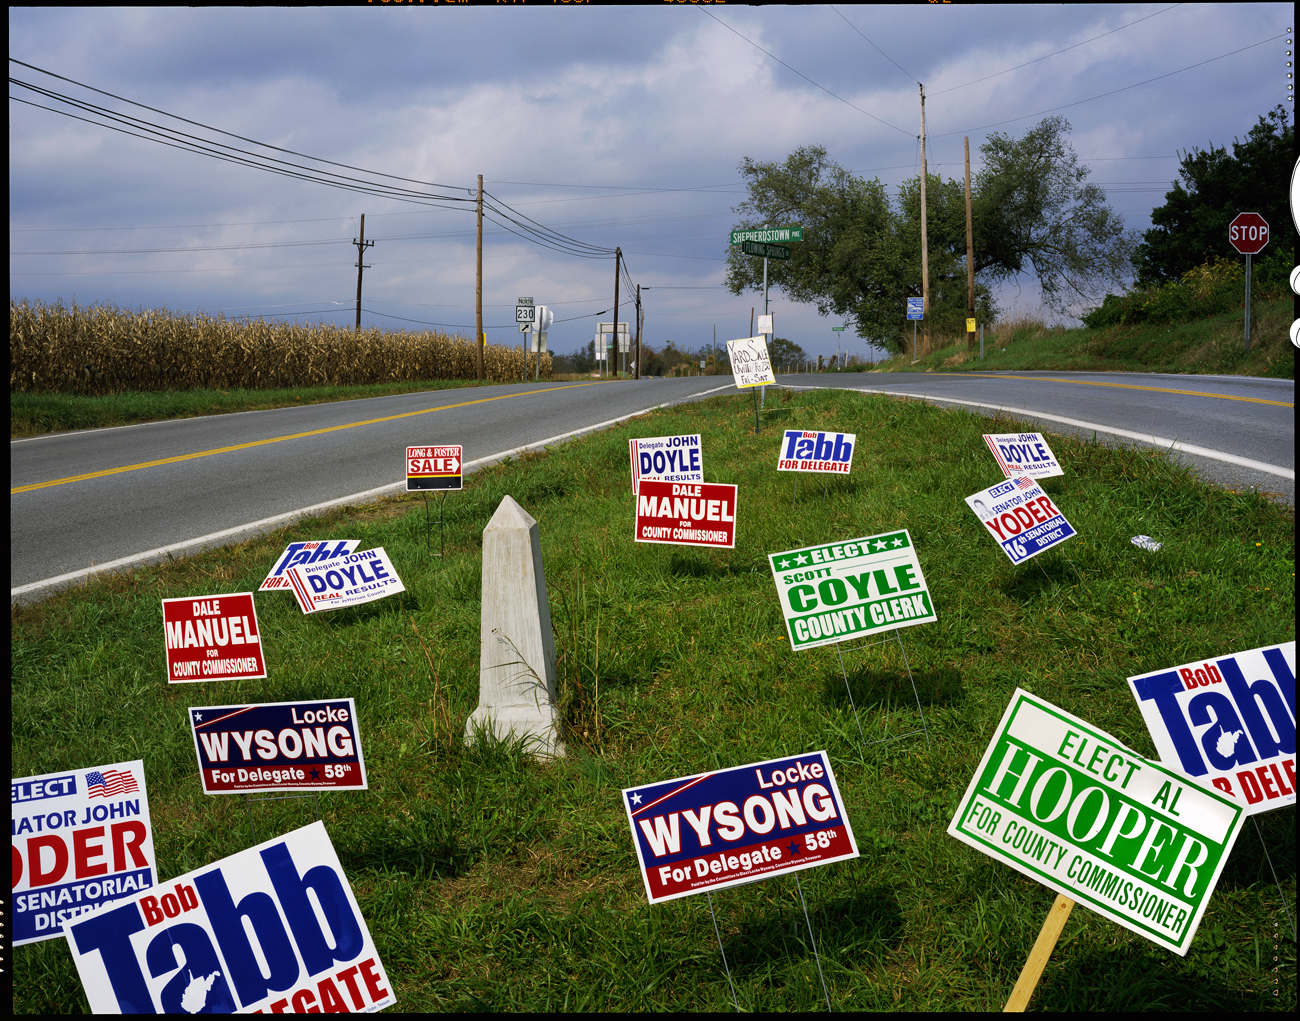 Election signs and historical marker, Shepherdstown, West Virginia, 2004